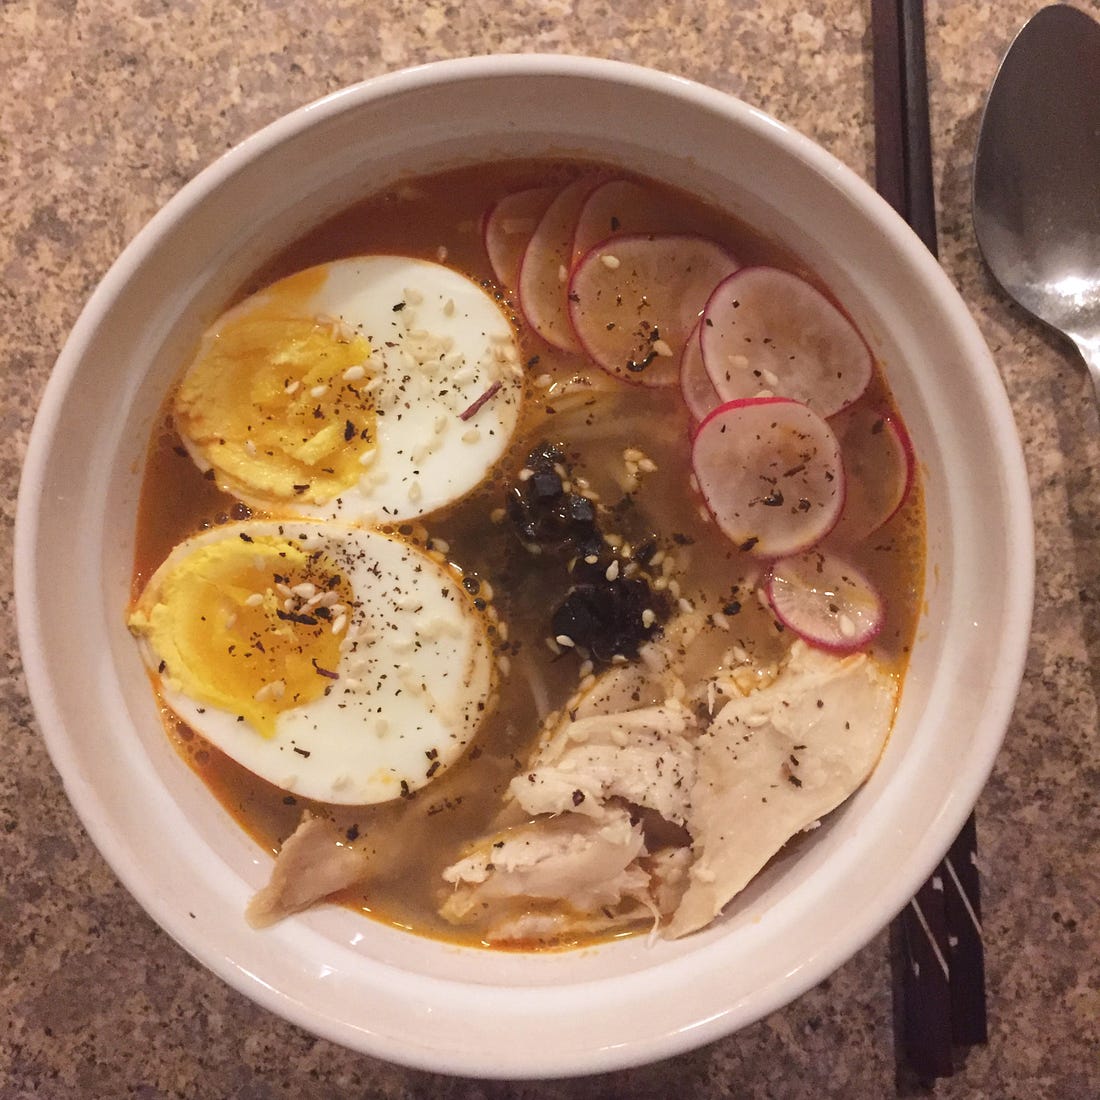 A large white bowl full of ramen. The noodles are just visible under a boiled egg, a pile of chopped black garlic, thin radish slices, and shreds of chicken. Dried shiso and toasted sesame seeds are sprinkled over the top, and to the right of the bowl are a large spoon and a set of dark wooden chopsticks.